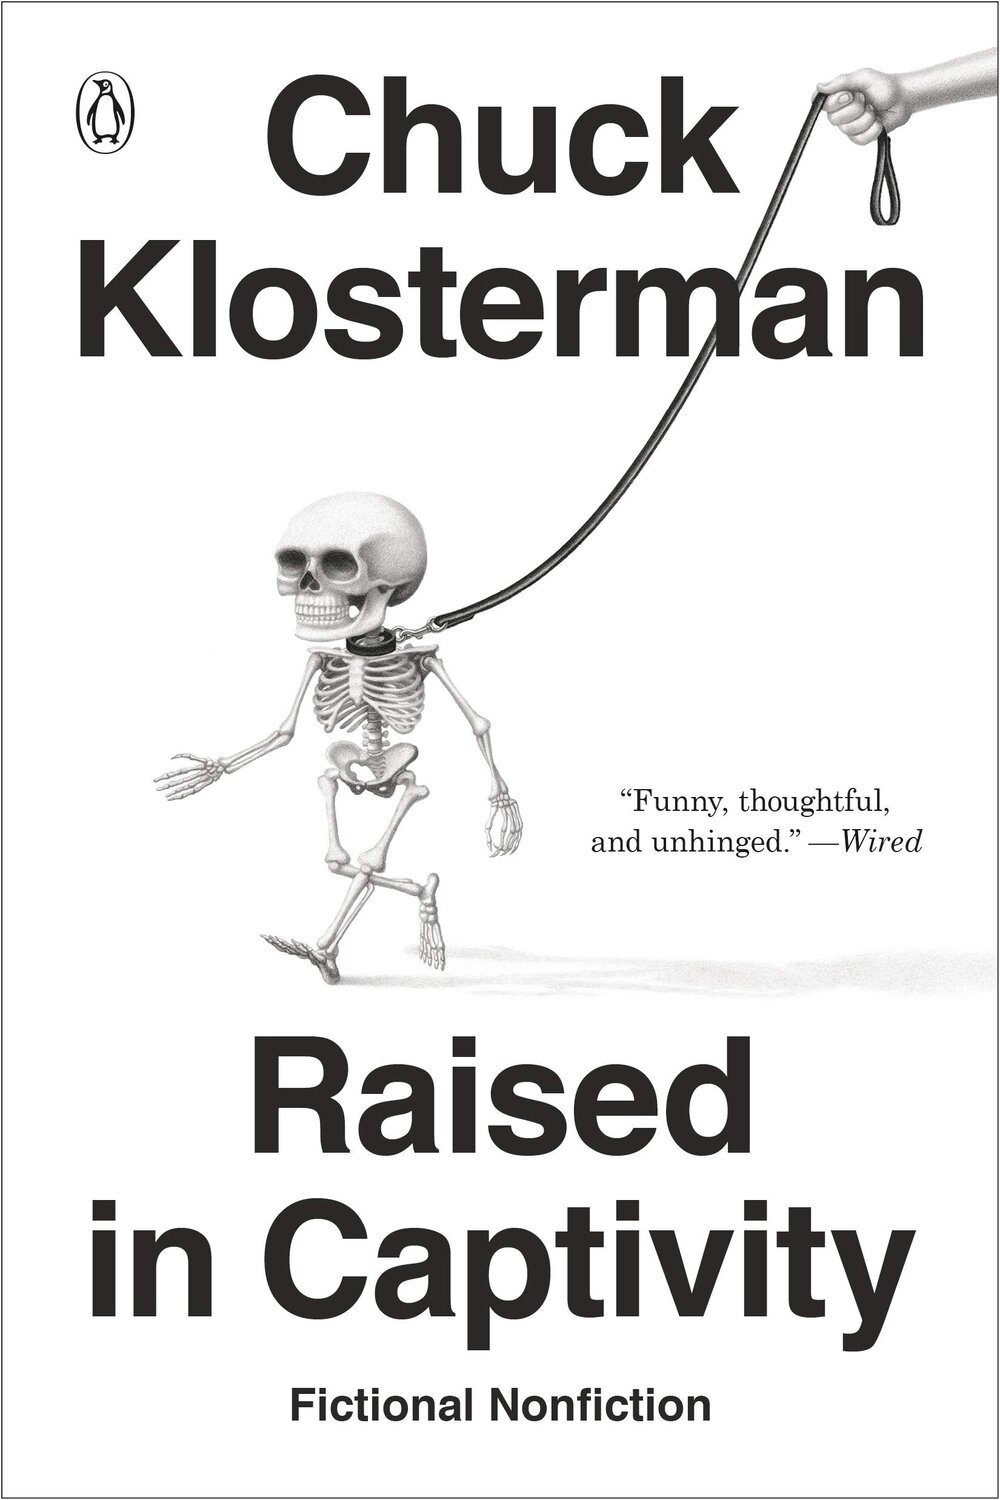 Raised in Captivity: Fictional Nonfiction by Chuck Klossterman